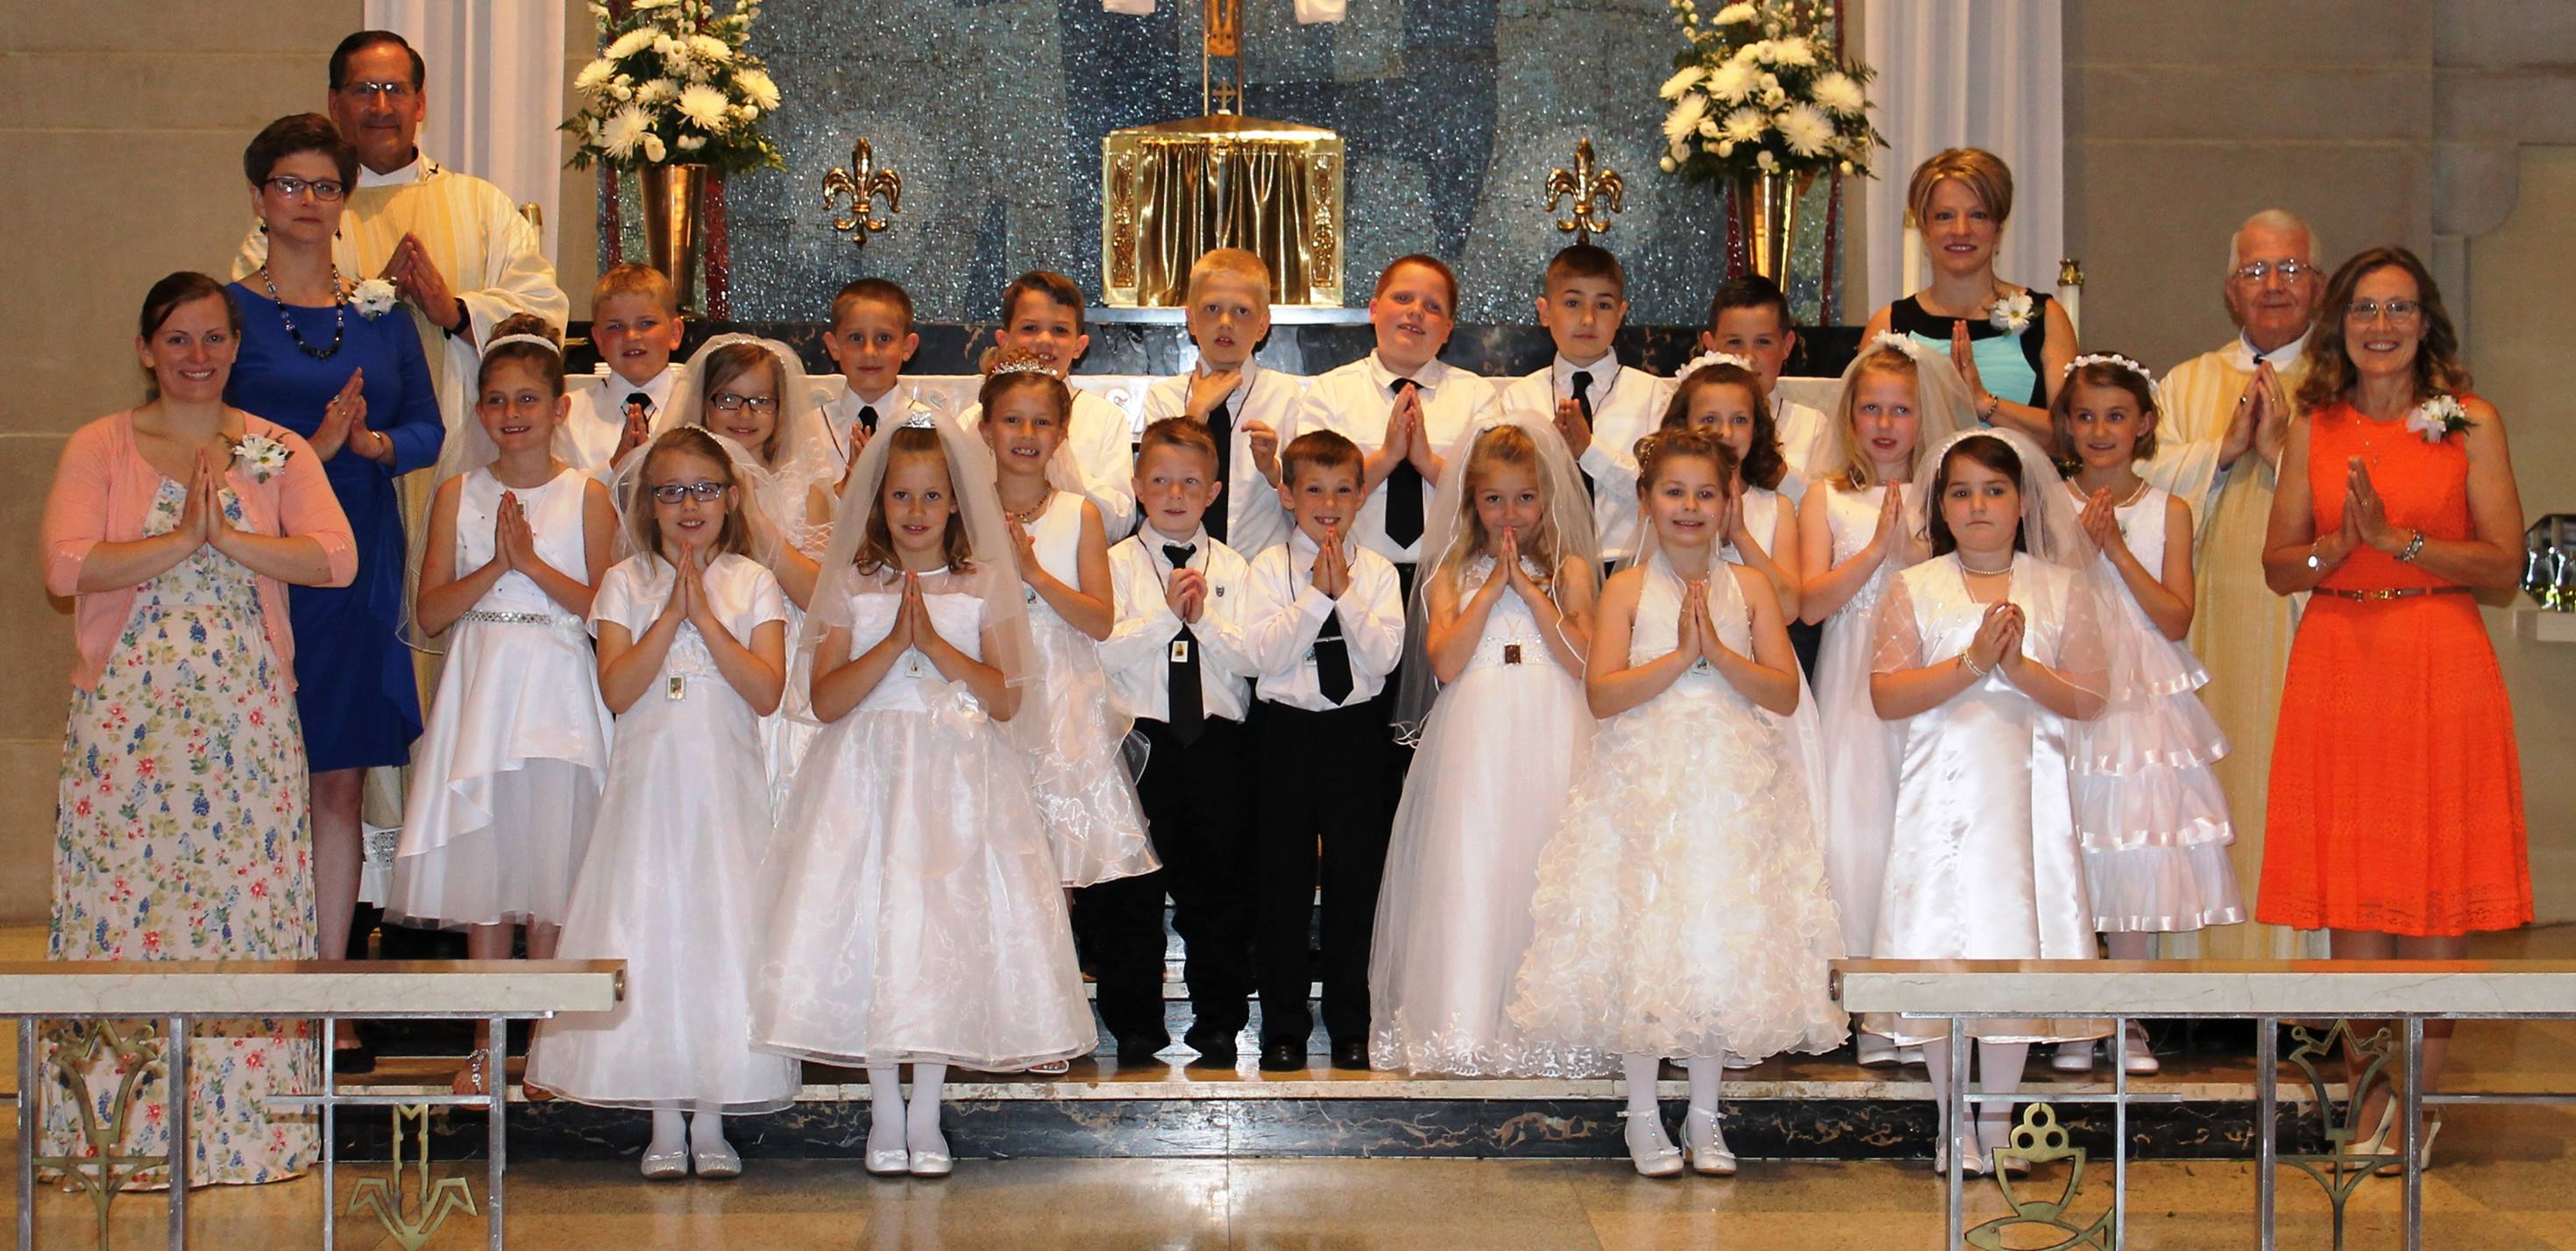 How old are you when you make your first communion First Holy Communion The Rosary Theology Of The Body Catholic Telegraph